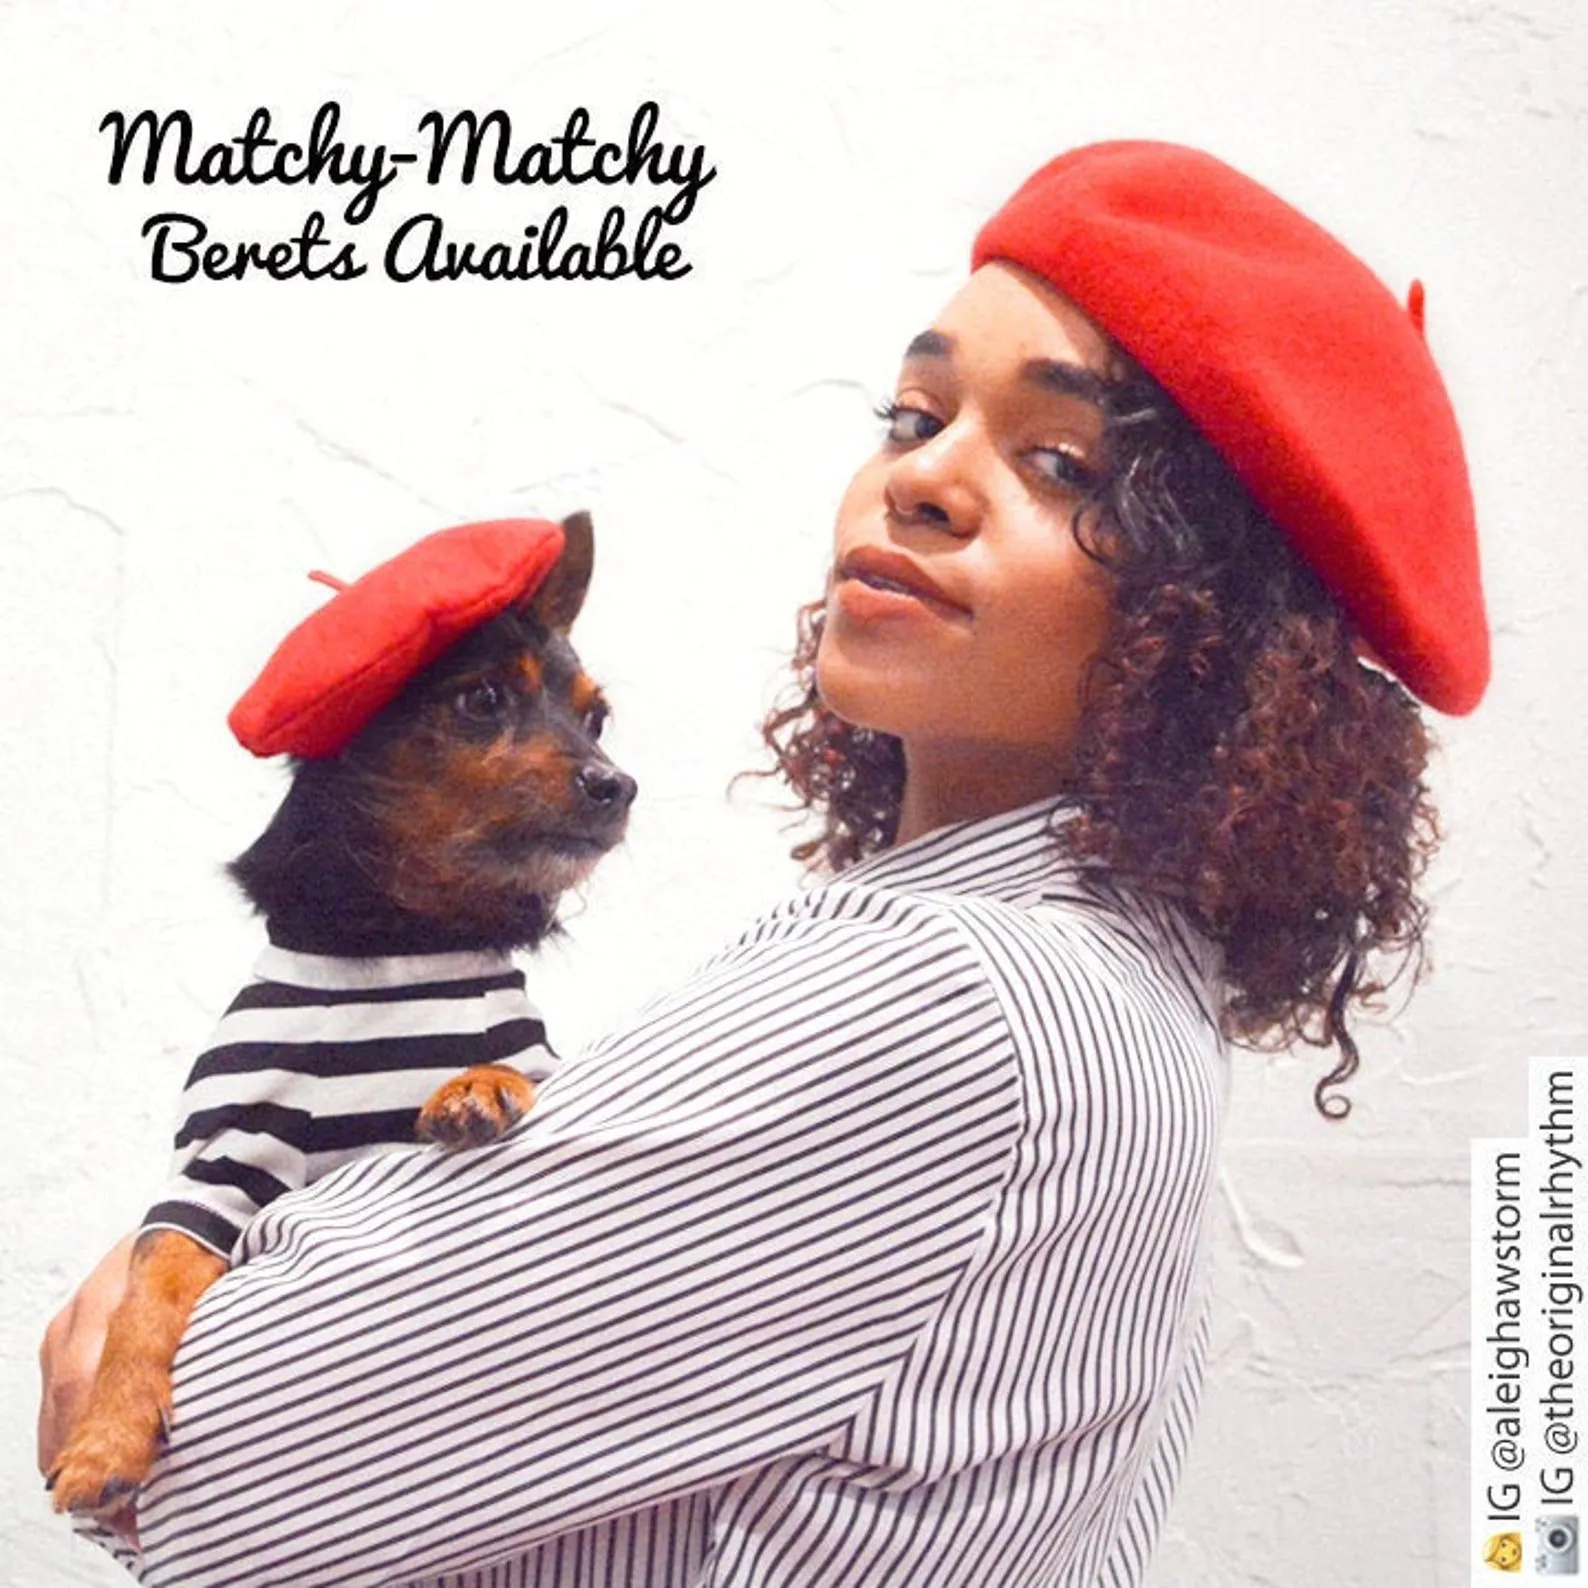 Matching berets for this chic doggy and their human friend